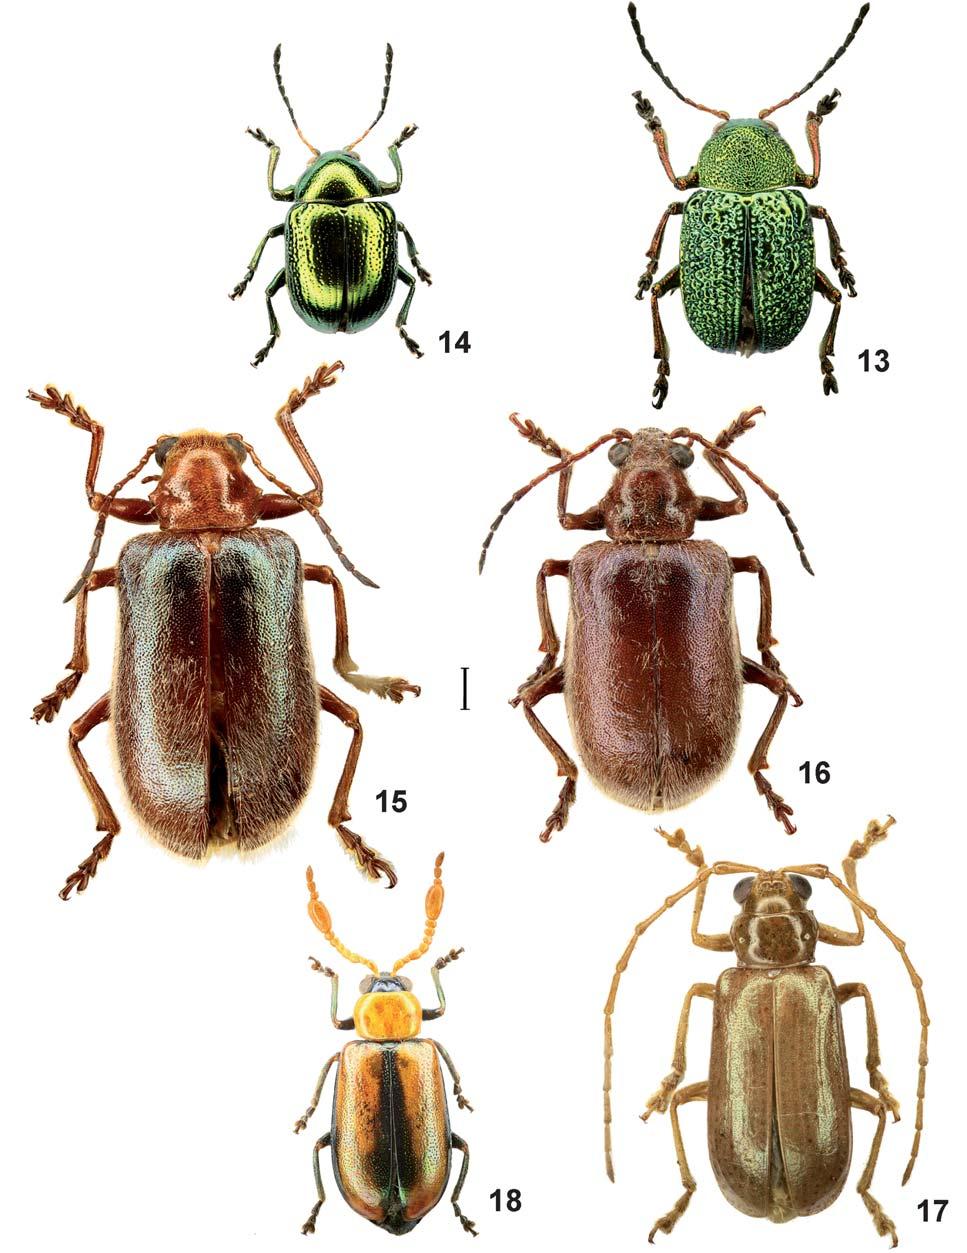 MEDVEDEV & ROMANTSOV, NEW AND POORLY KNOWN CHRYSOMELIDAE FROM BORNEO 243 Figs. 13 18. Chrysomelidae from Borneo, dorsal view. 13. Colaspoides punctipleuris L. Medvedev, 2003. 14.